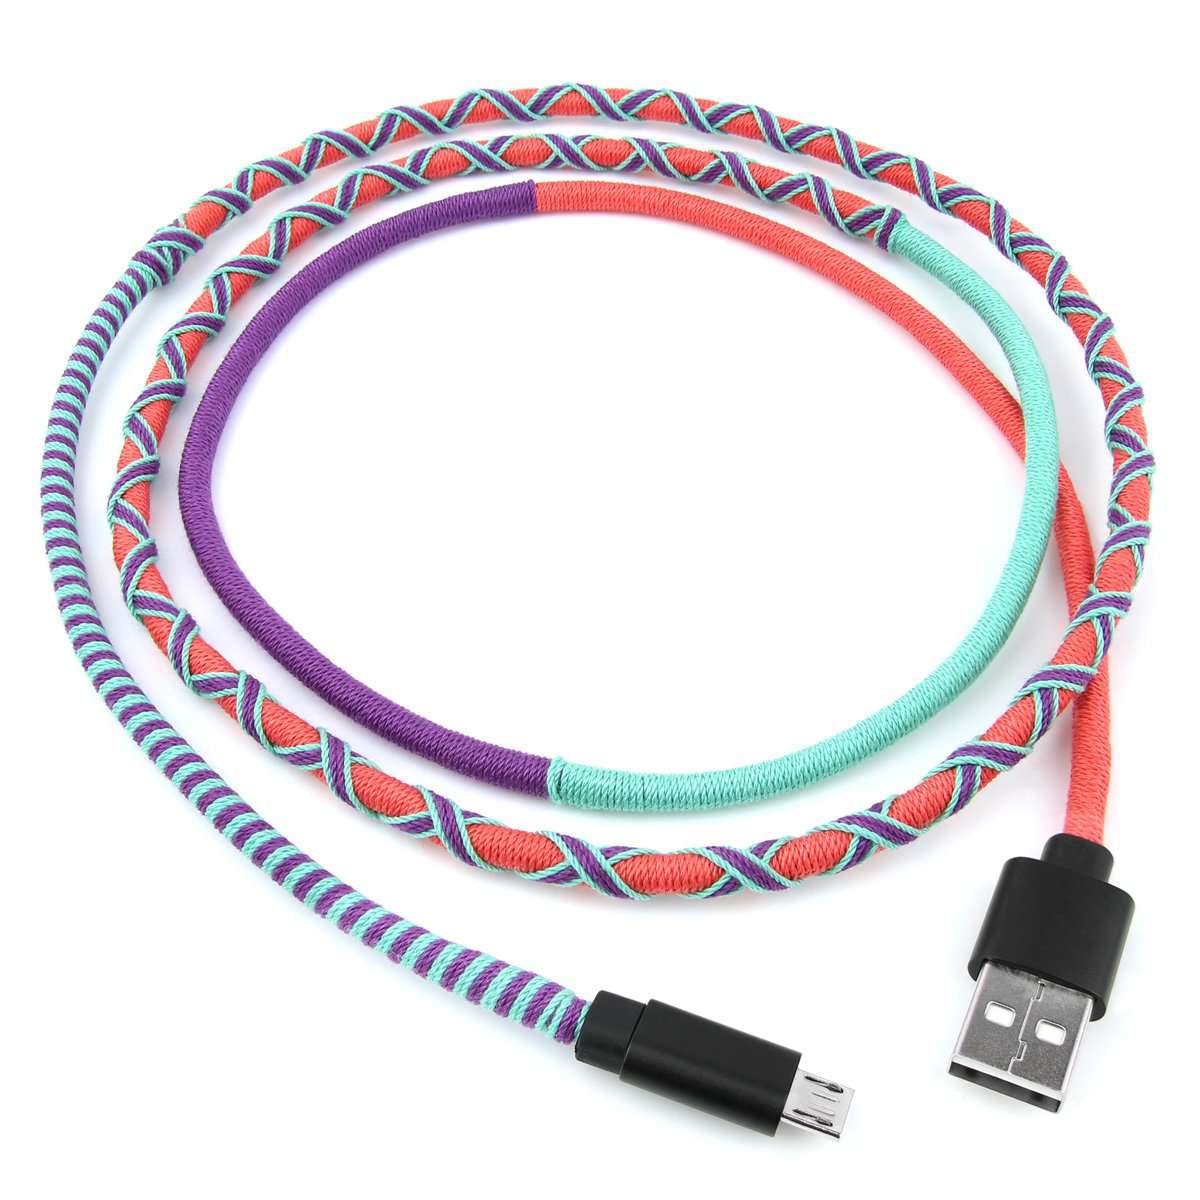 Crossloop Fast Charging Micro USB Cable In Apple Candy Red Purple